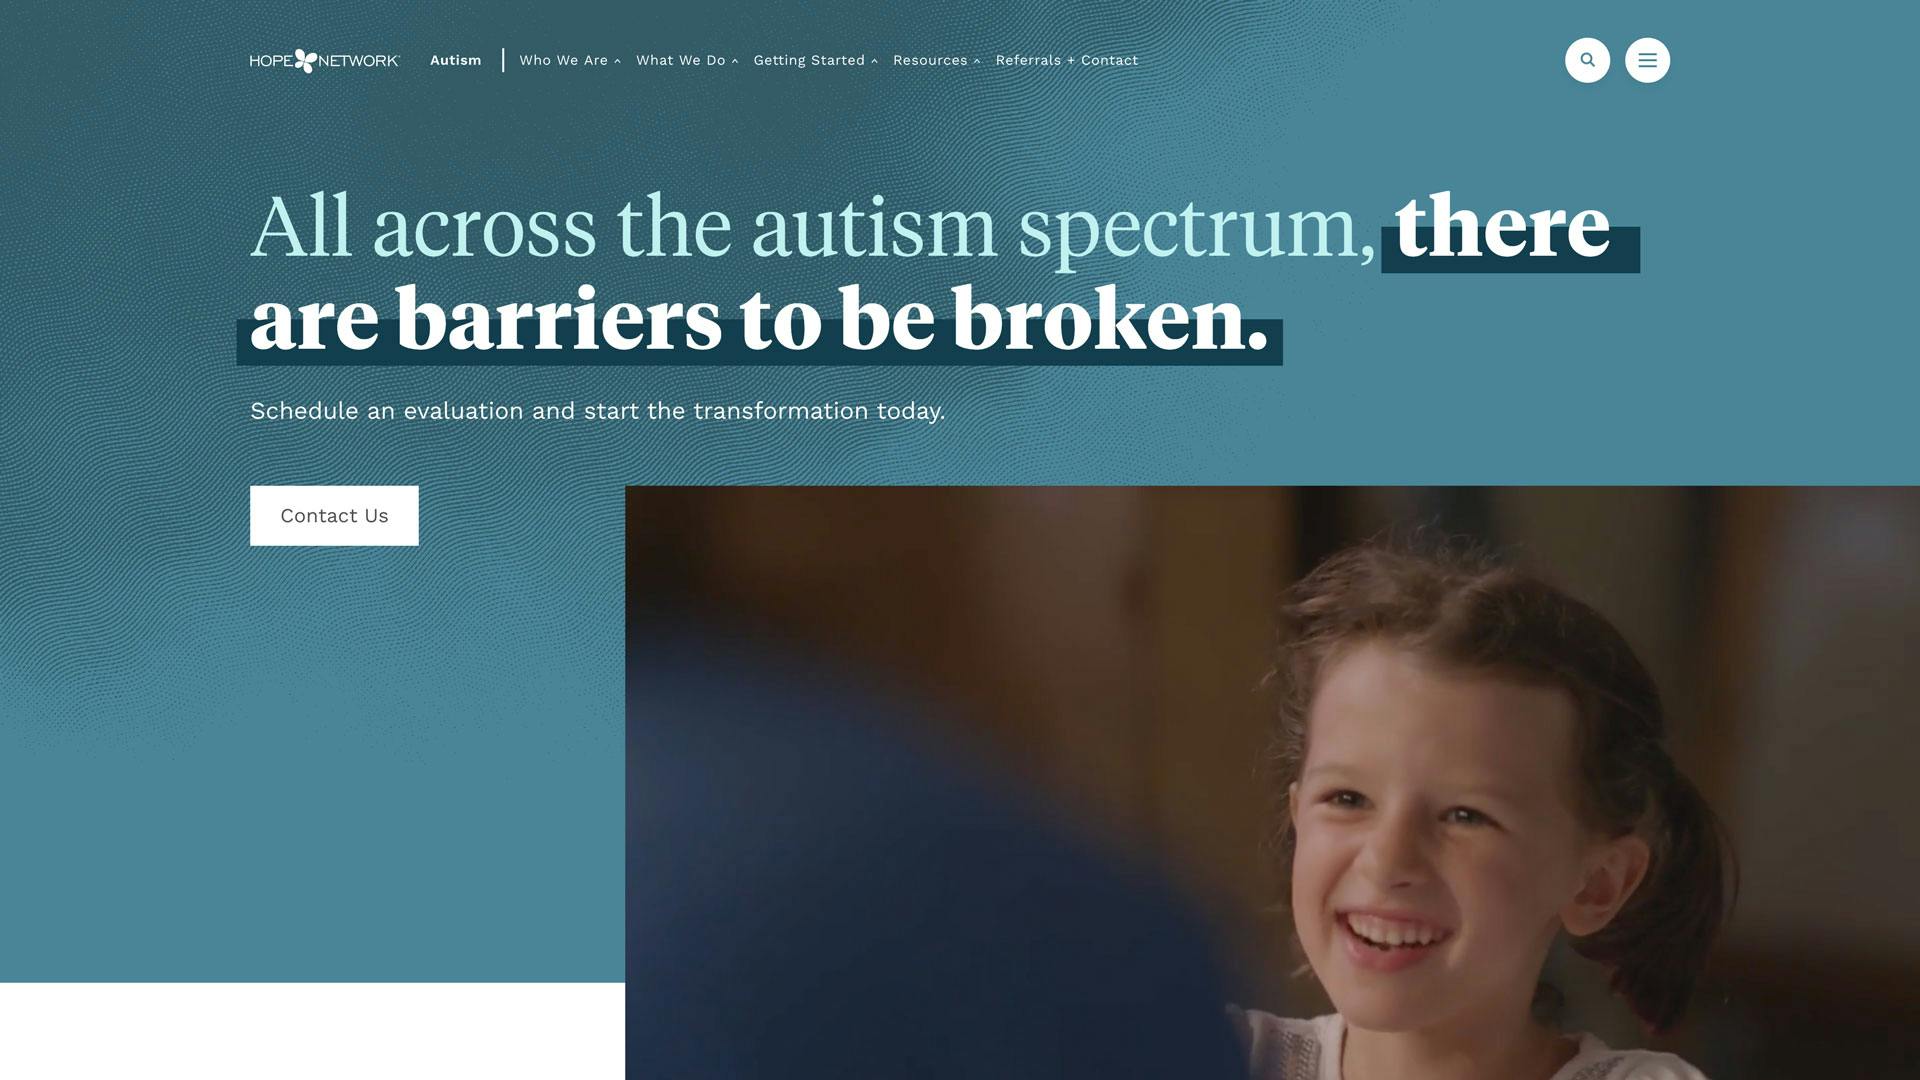 Hope Network Autism Subsite